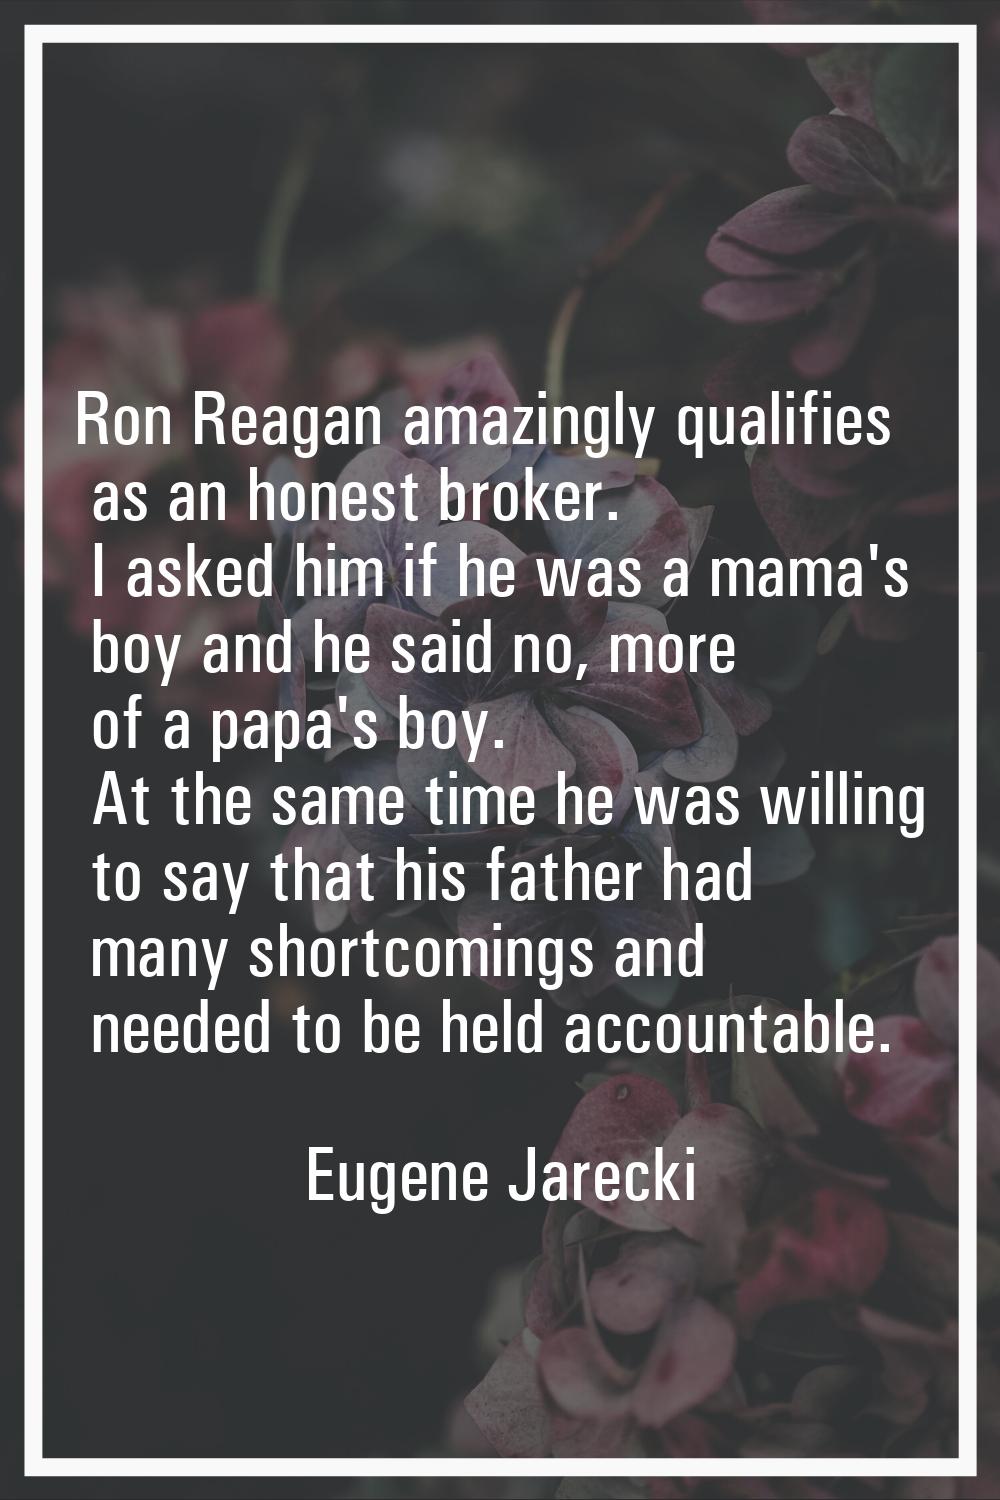 Ron Reagan amazingly qualifies as an honest broker. I asked him if he was a mama's boy and he said 